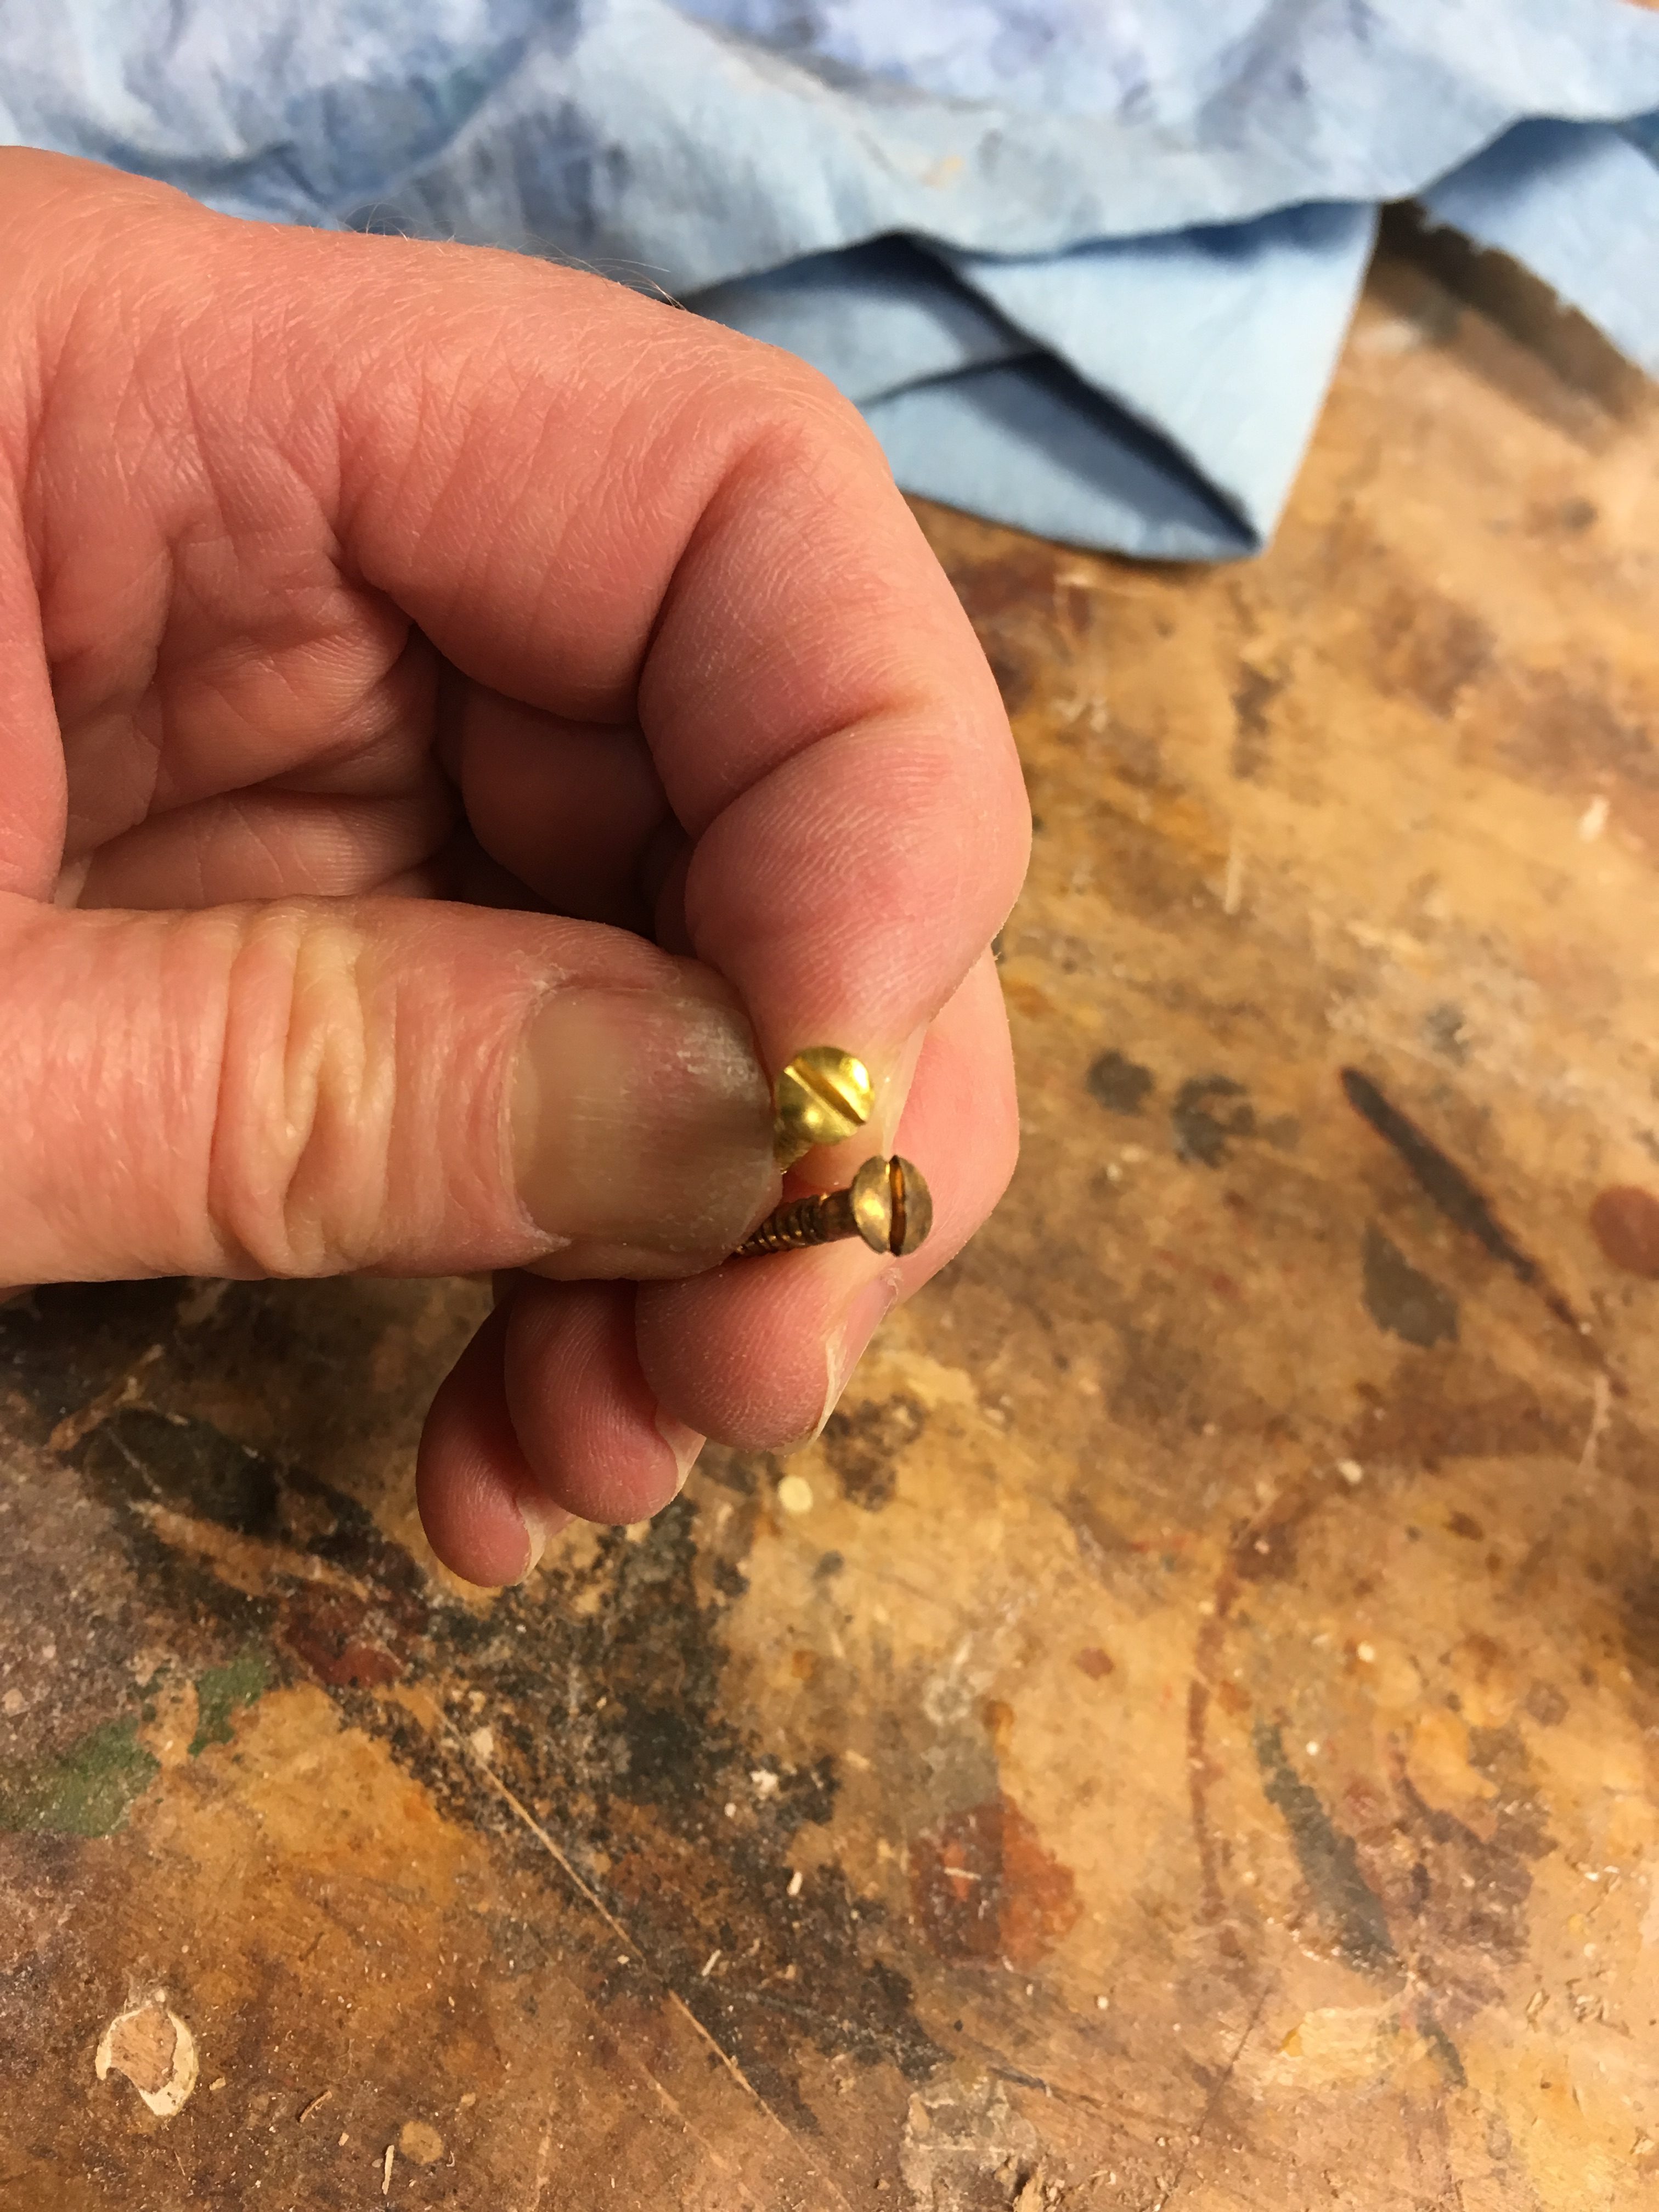 two techniques for aging brass